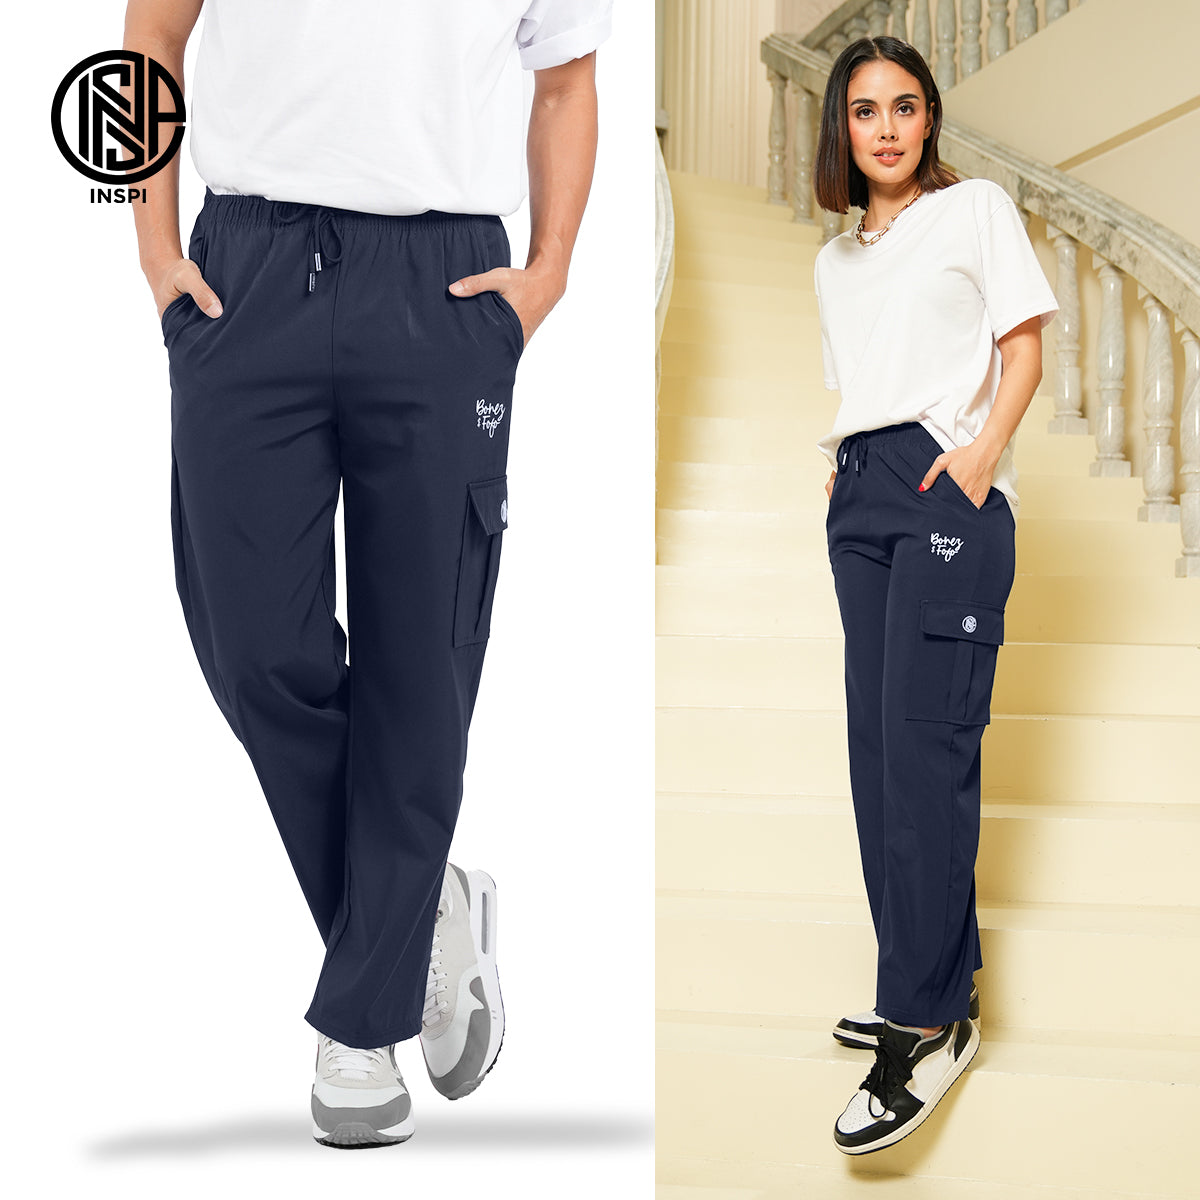 INSPI x Bonez & Fofo Cargo Pants For Men and Women with Side Pocket & Drawstring High Waist Trouser Plain Straight Cut Pant